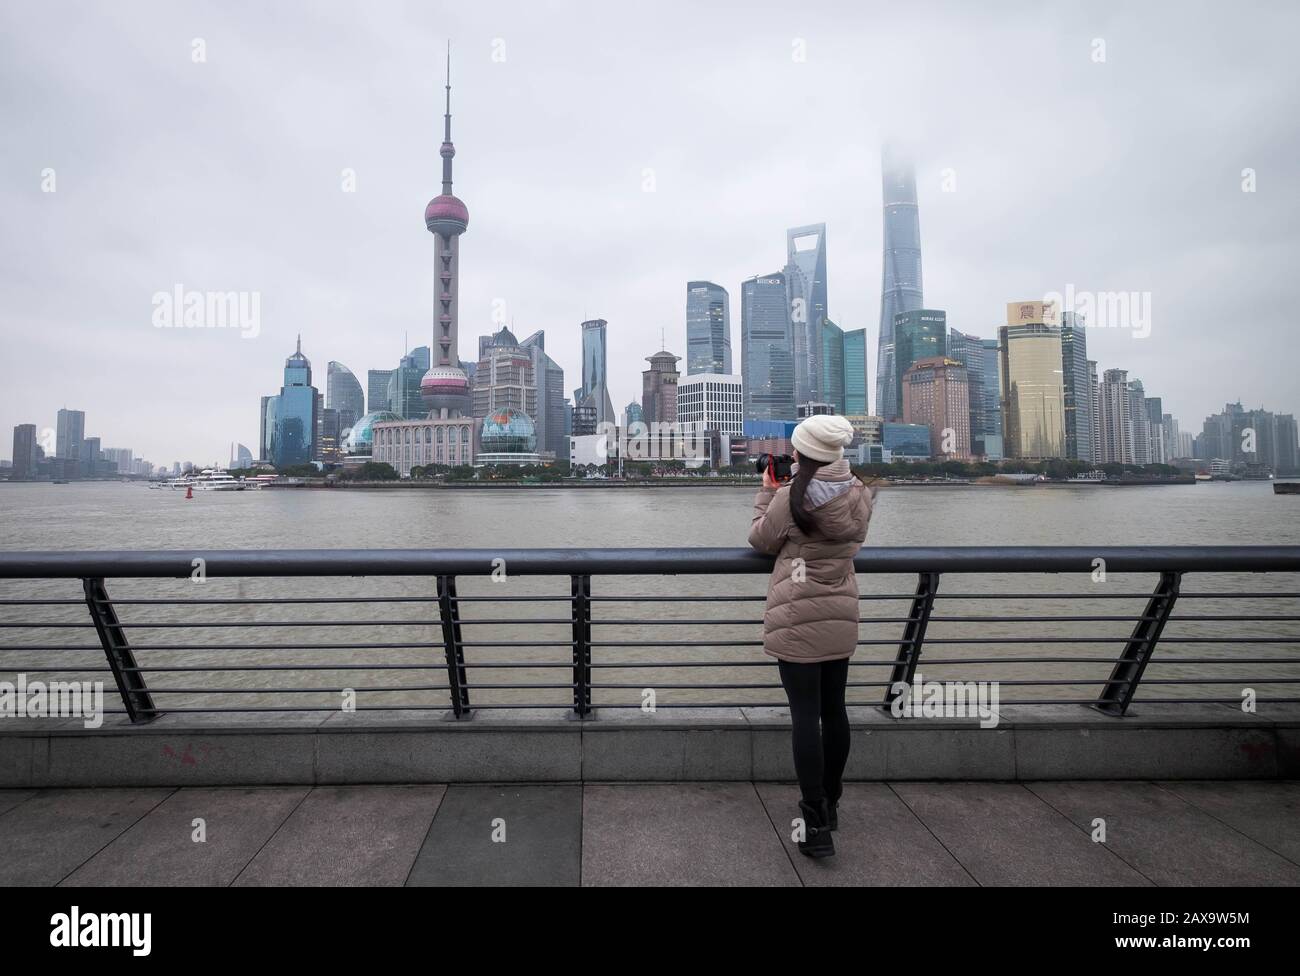 SHANGHAI, CHINA - JANUARY 09 2020: The unspecific girl at the Shanghai Waitan "The Bund" at the viewpoint.  This here is the famous for the traveler. Stock Photo